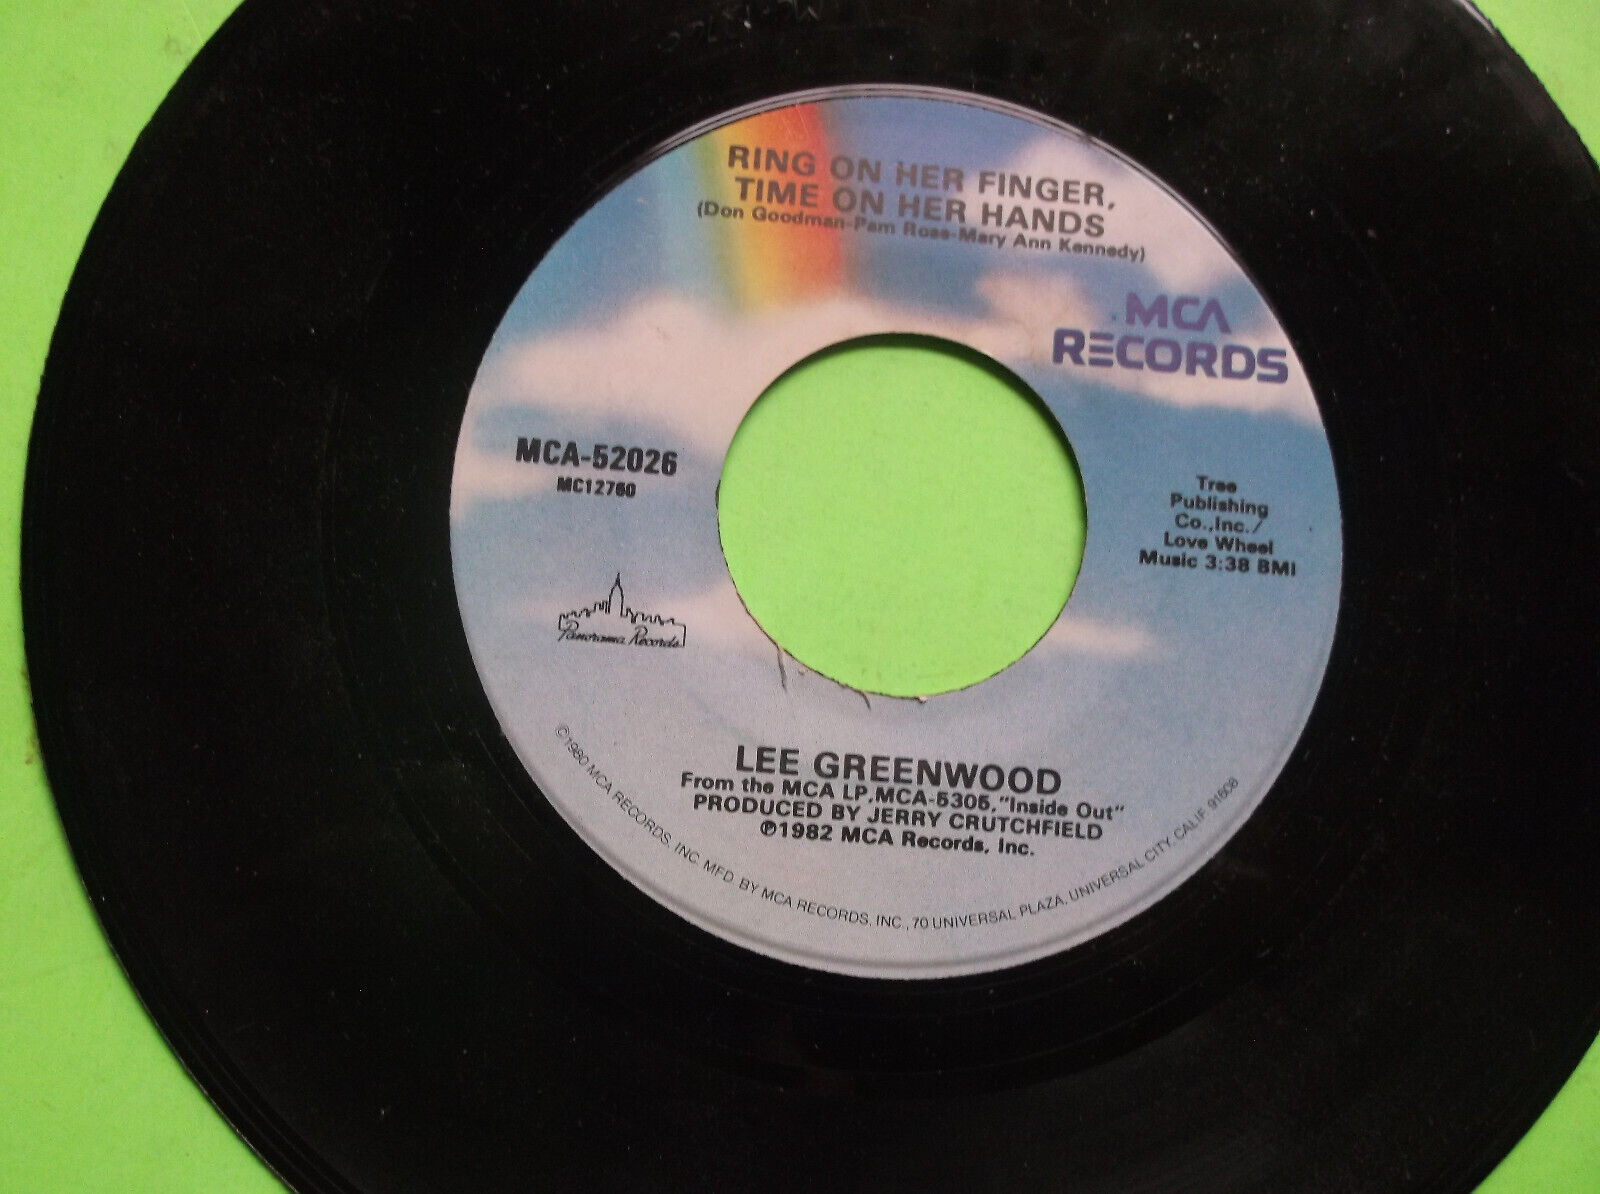 DONCHA HEAR ME CALLIN' BY LEE GREENWOOD 45 RPM 7" COUNTRY 1982